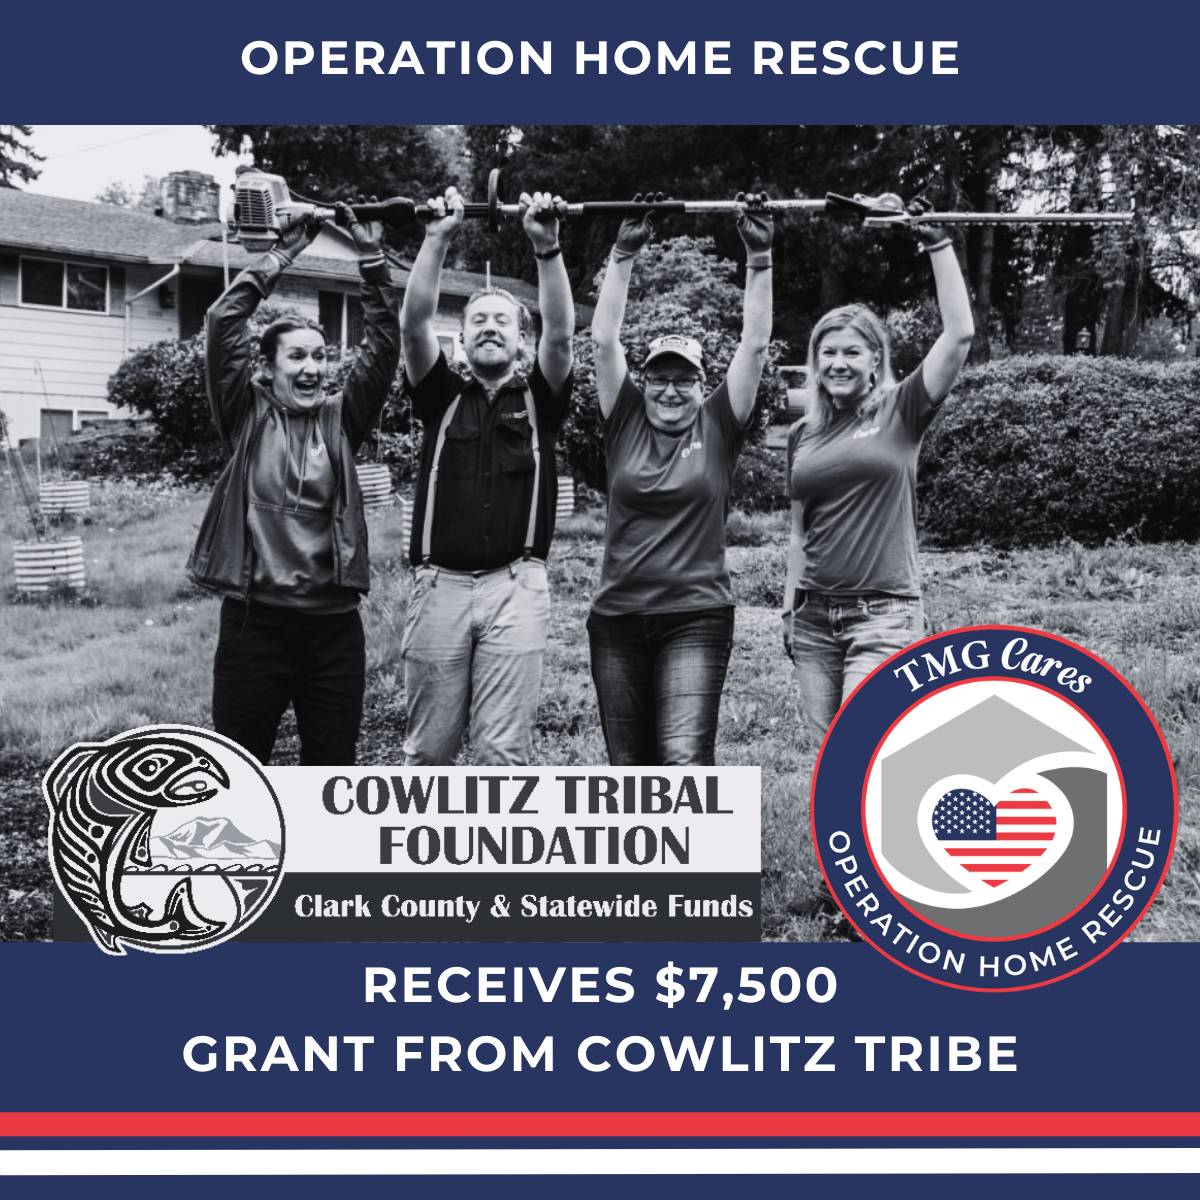 OHR Receives 7500 grant from cowlitz tribe